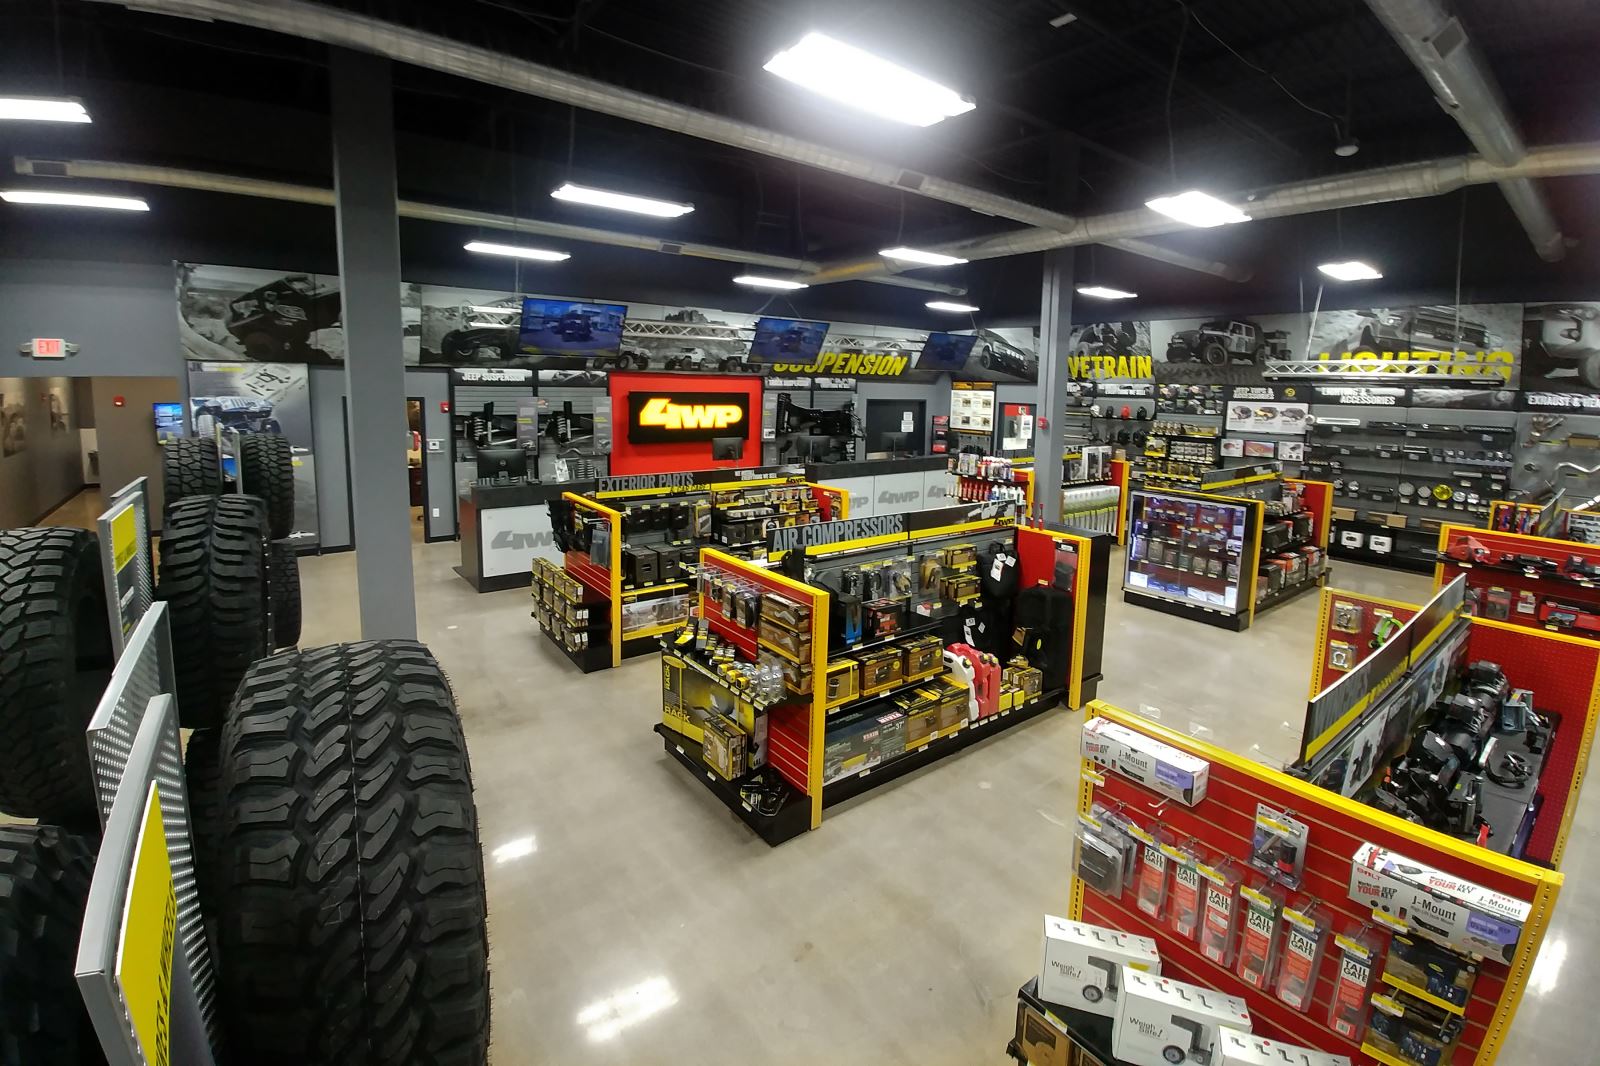 4 Wheel Parts Stores Holding Grand Opening Celebrations In Pittsburgh